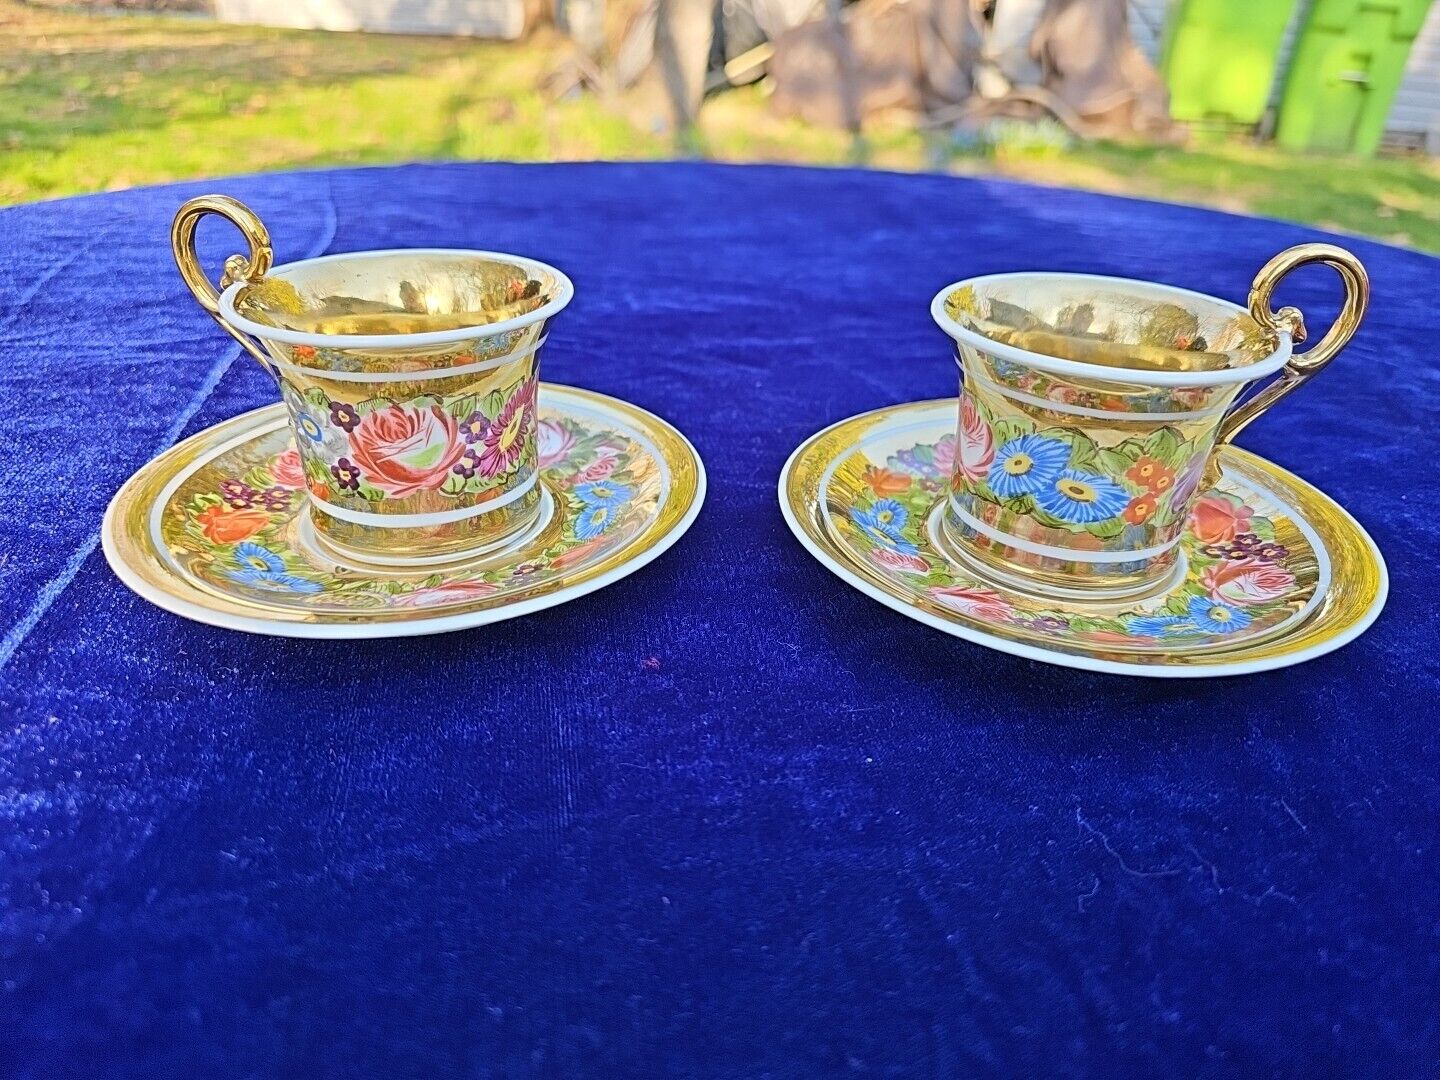 Antique set of two China  coffee or teacups Limoges or Capodimonte.